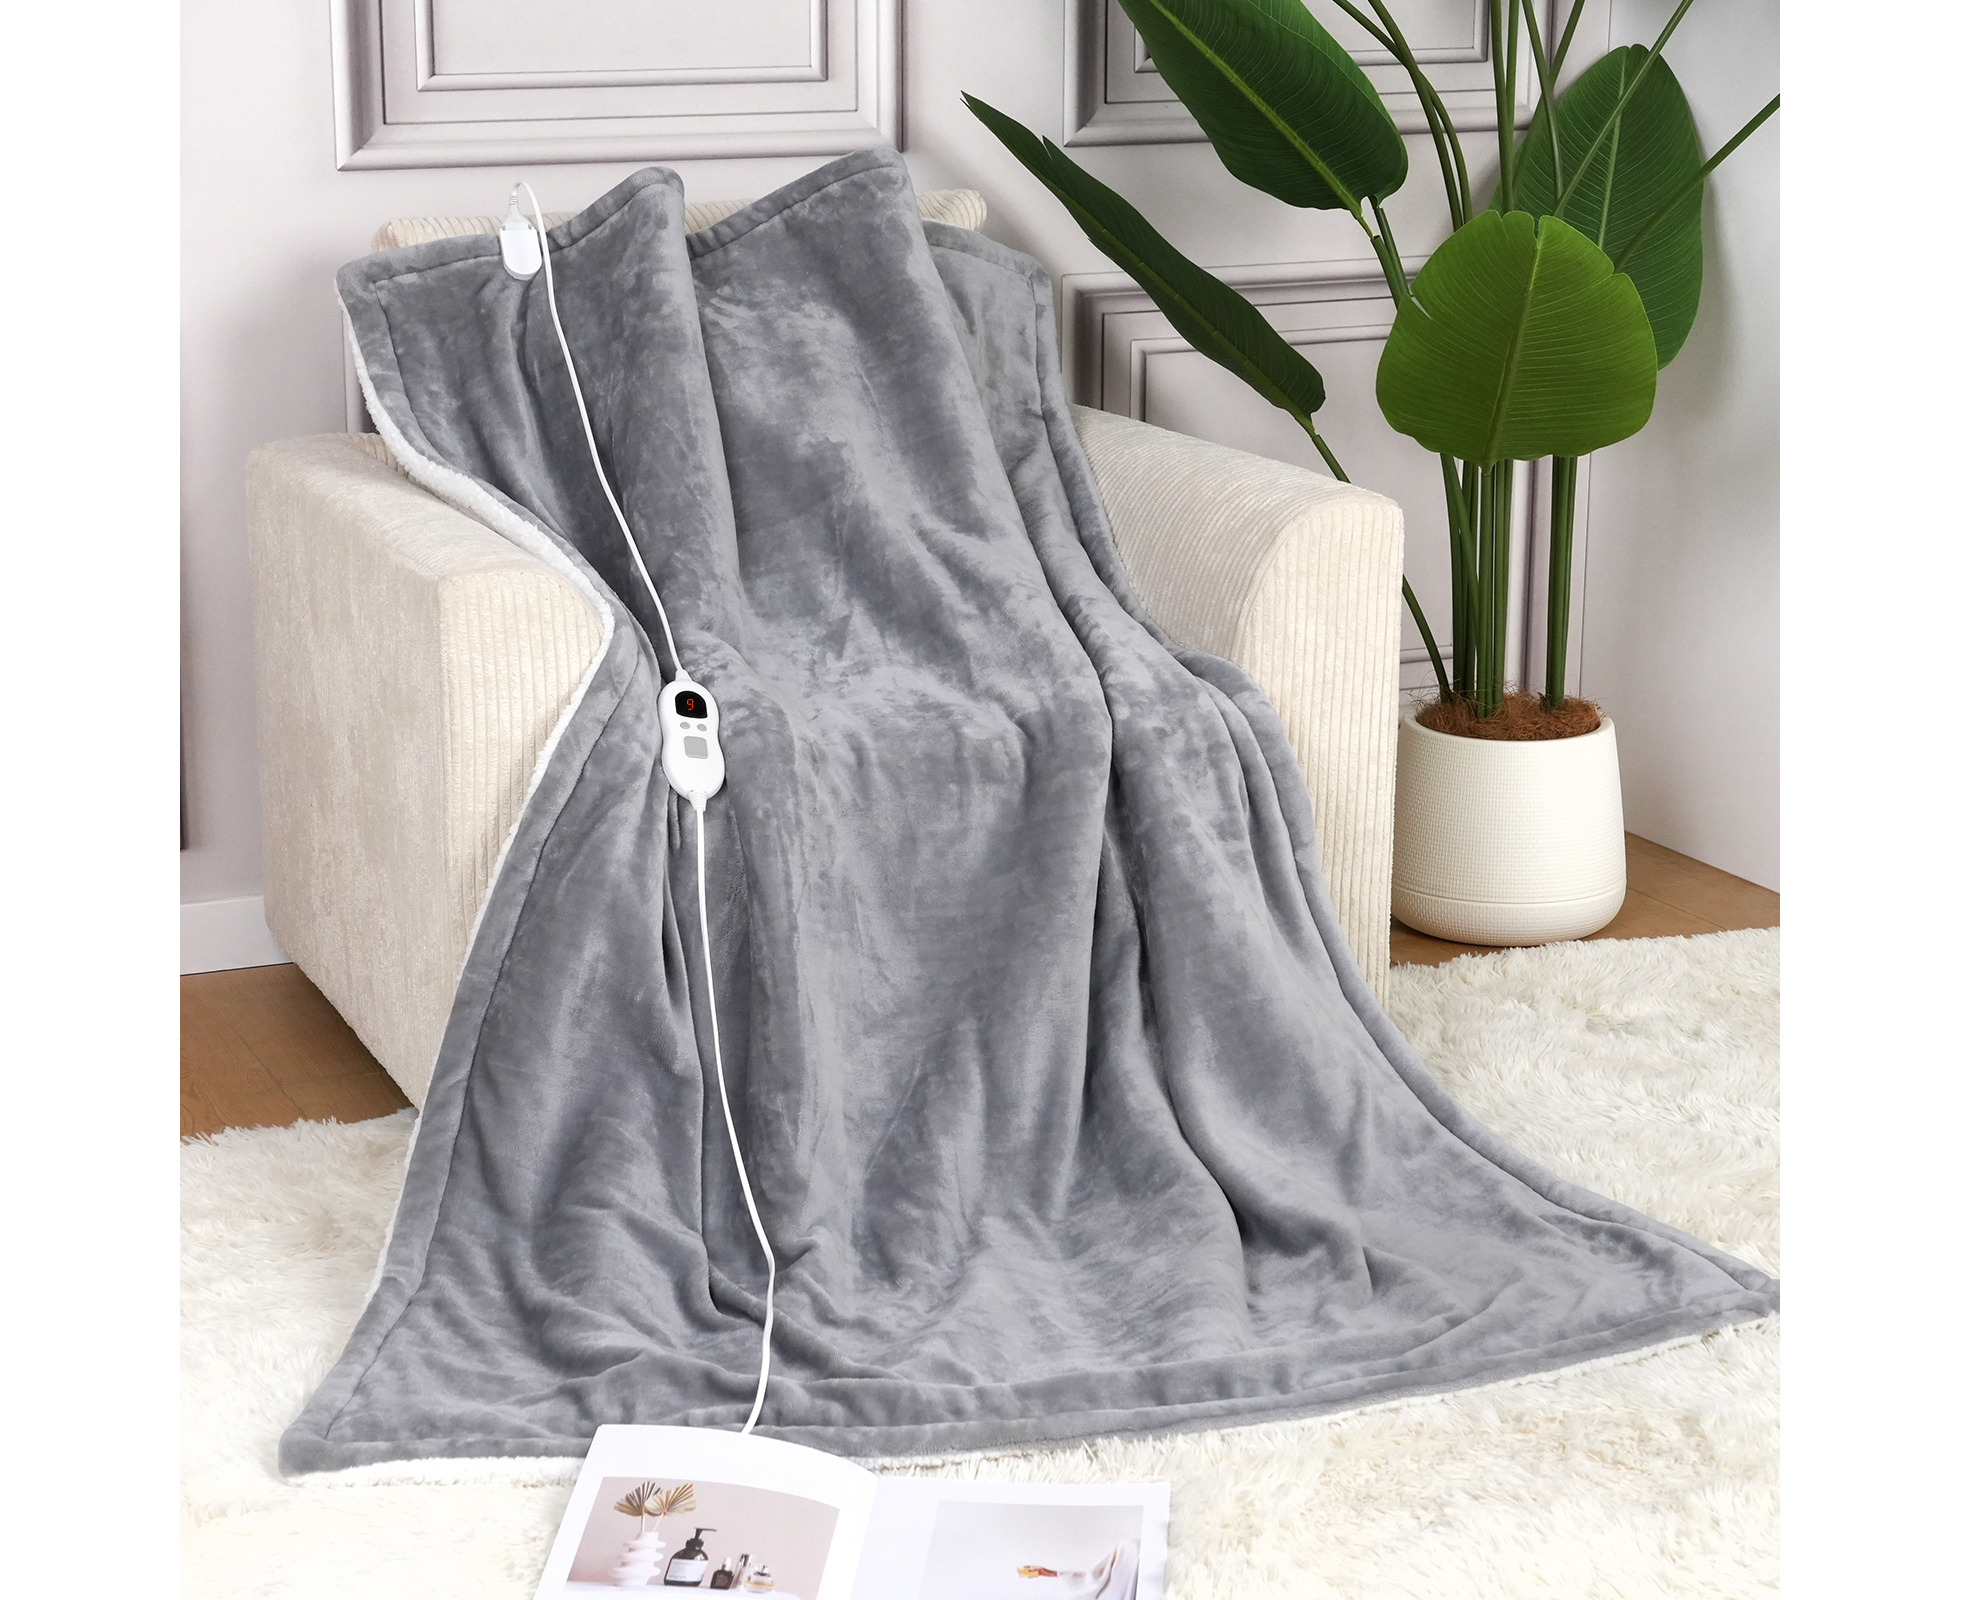 Advwin Electric Heated Throw Blanket w/LED Display/ 6 Heat Levels/ 9 Timer Washable Blankets with Overheating Protection Grey | Catch.com.au